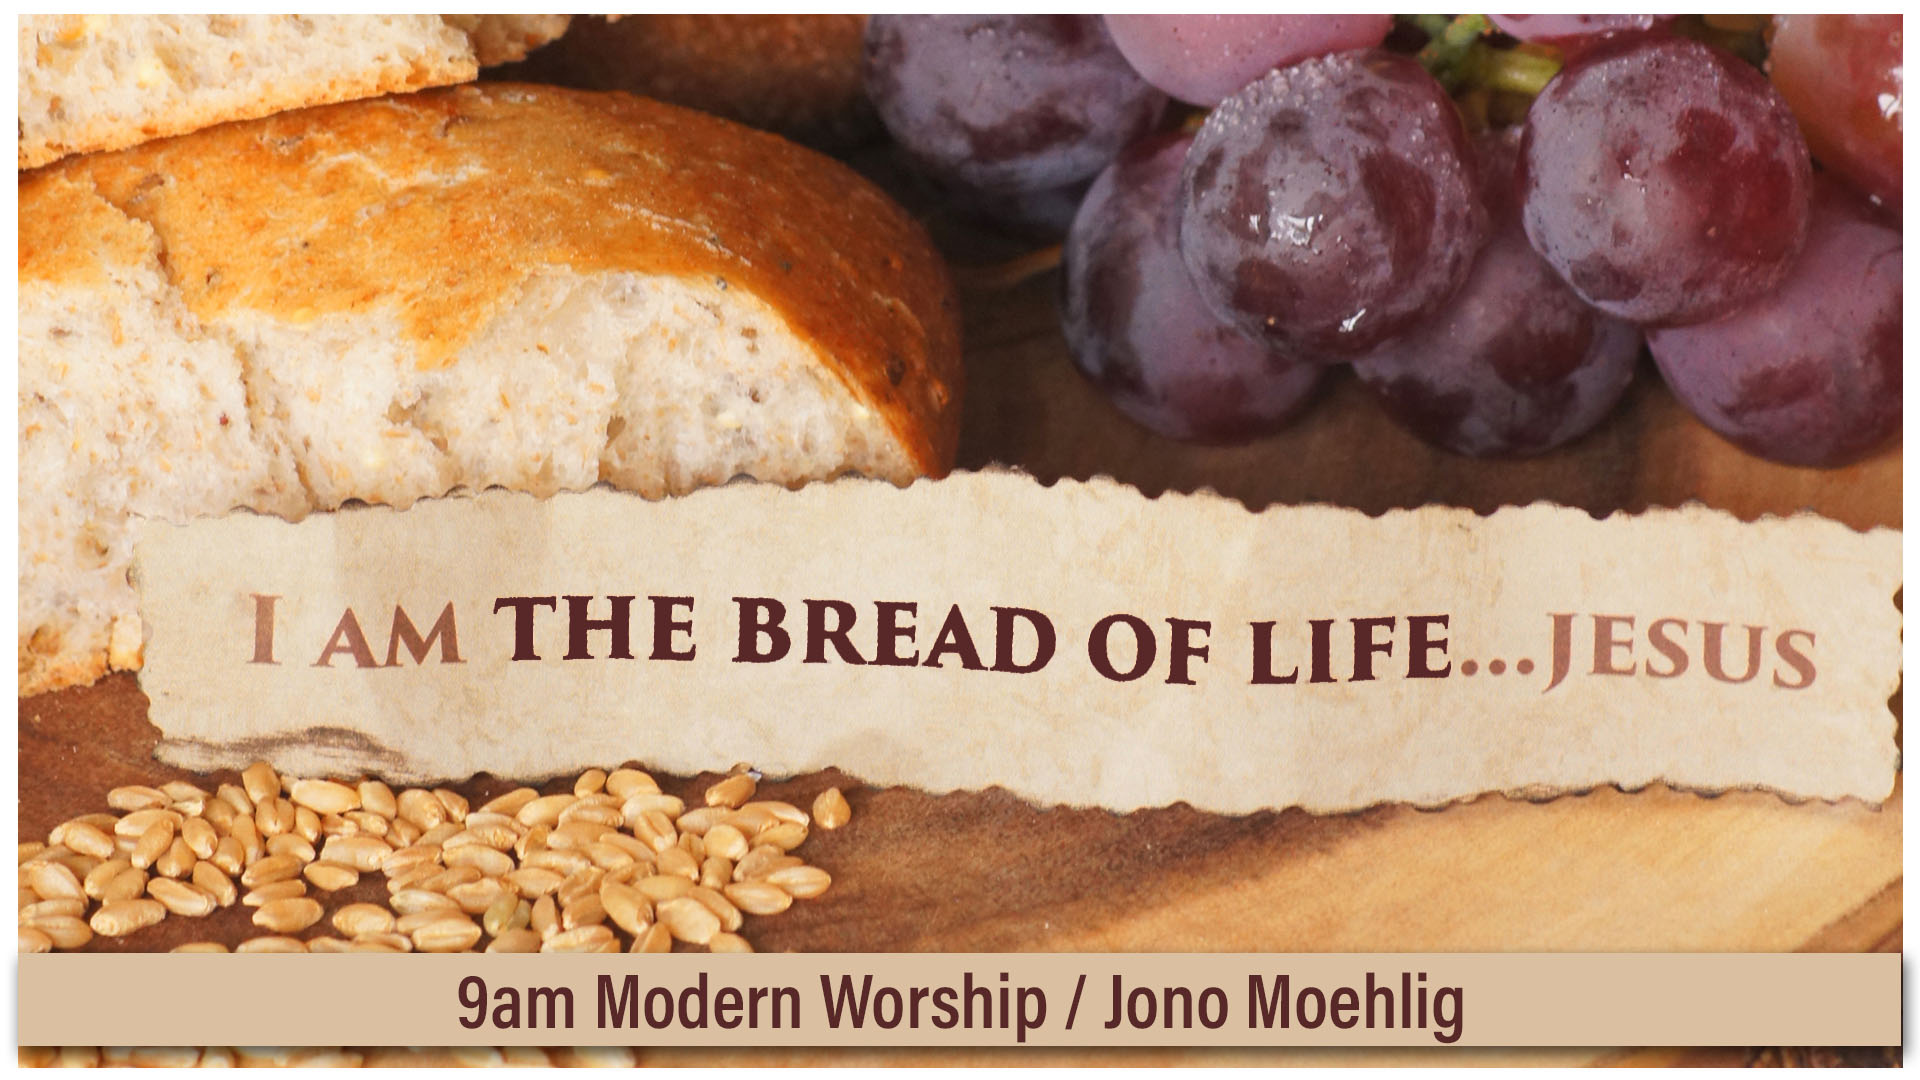 I Am the Bread of Life (Common Foundation)